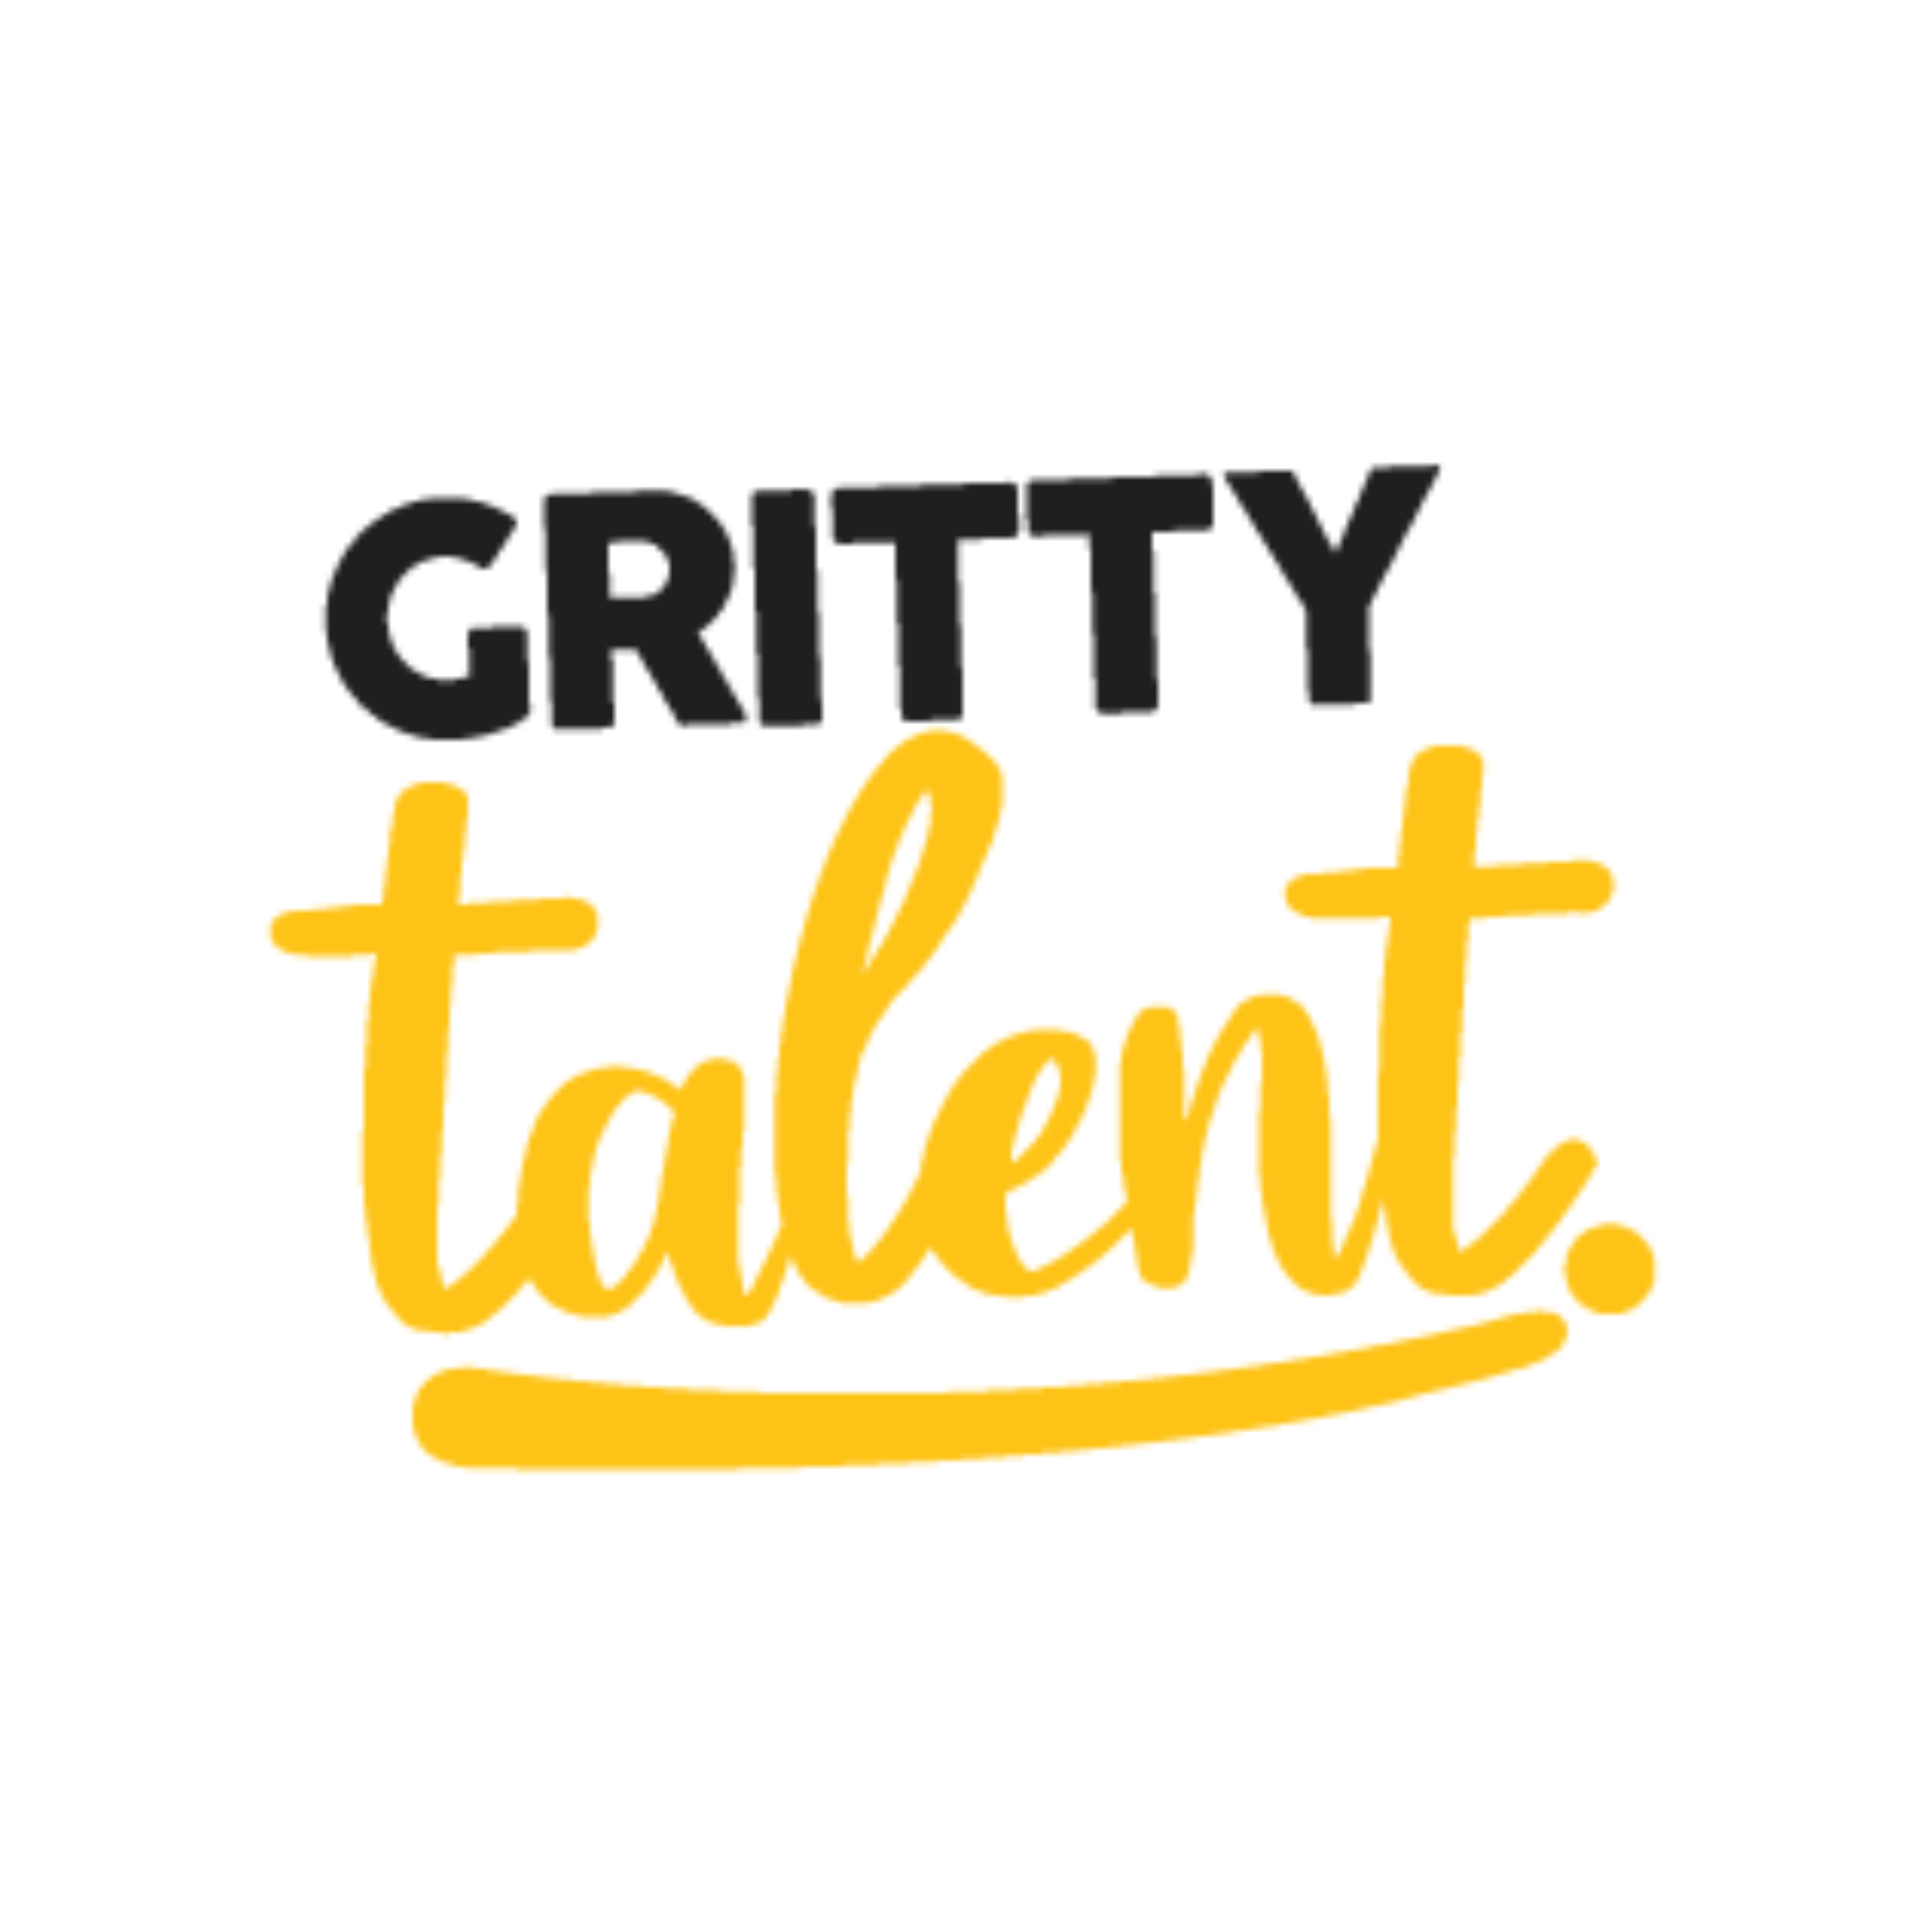 An image of Gritty Talent's logo